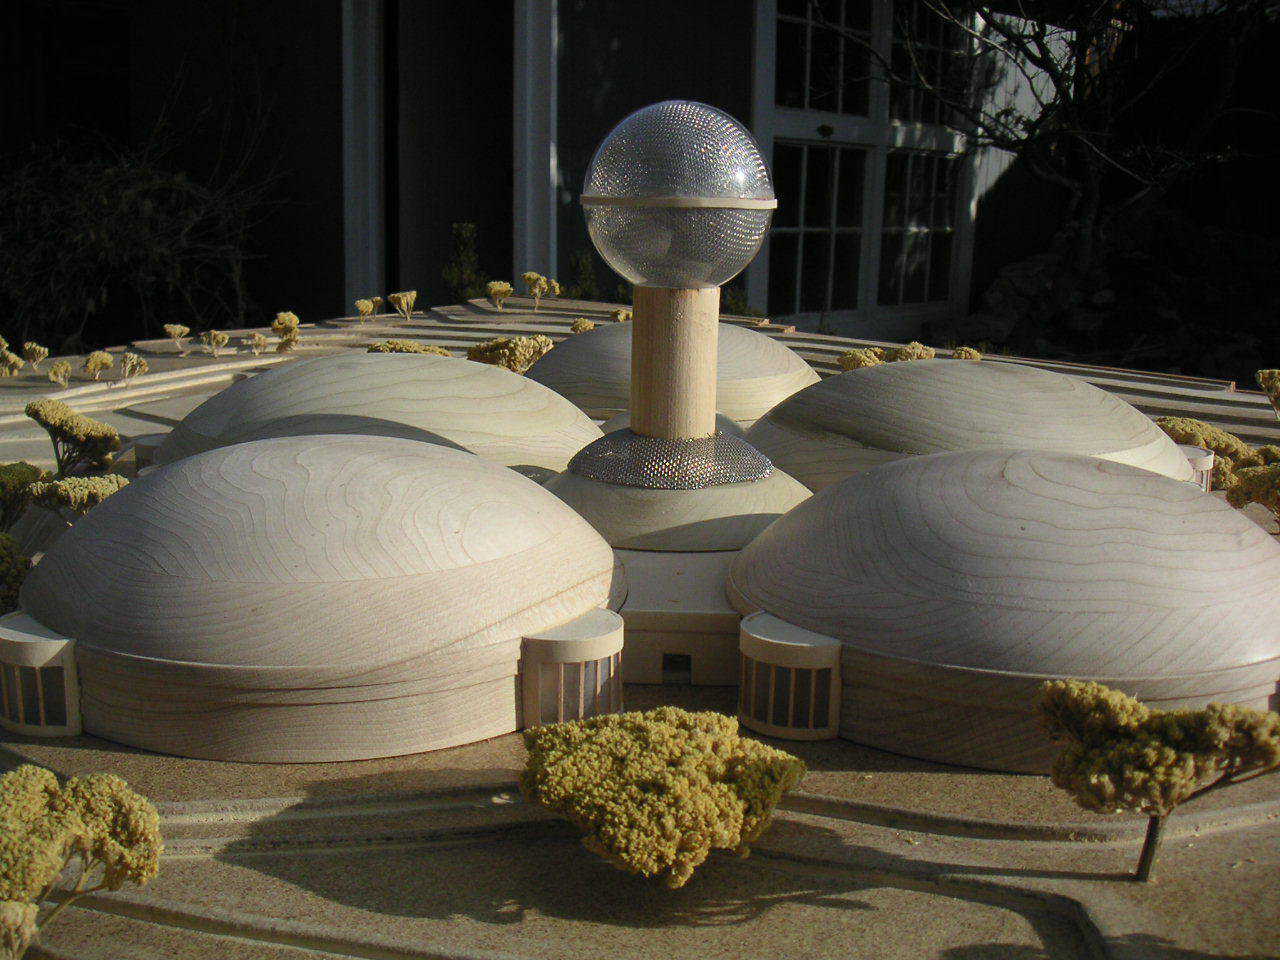 A complex of 5 Monolithic Domes — Each dome houses a specific group or activity.